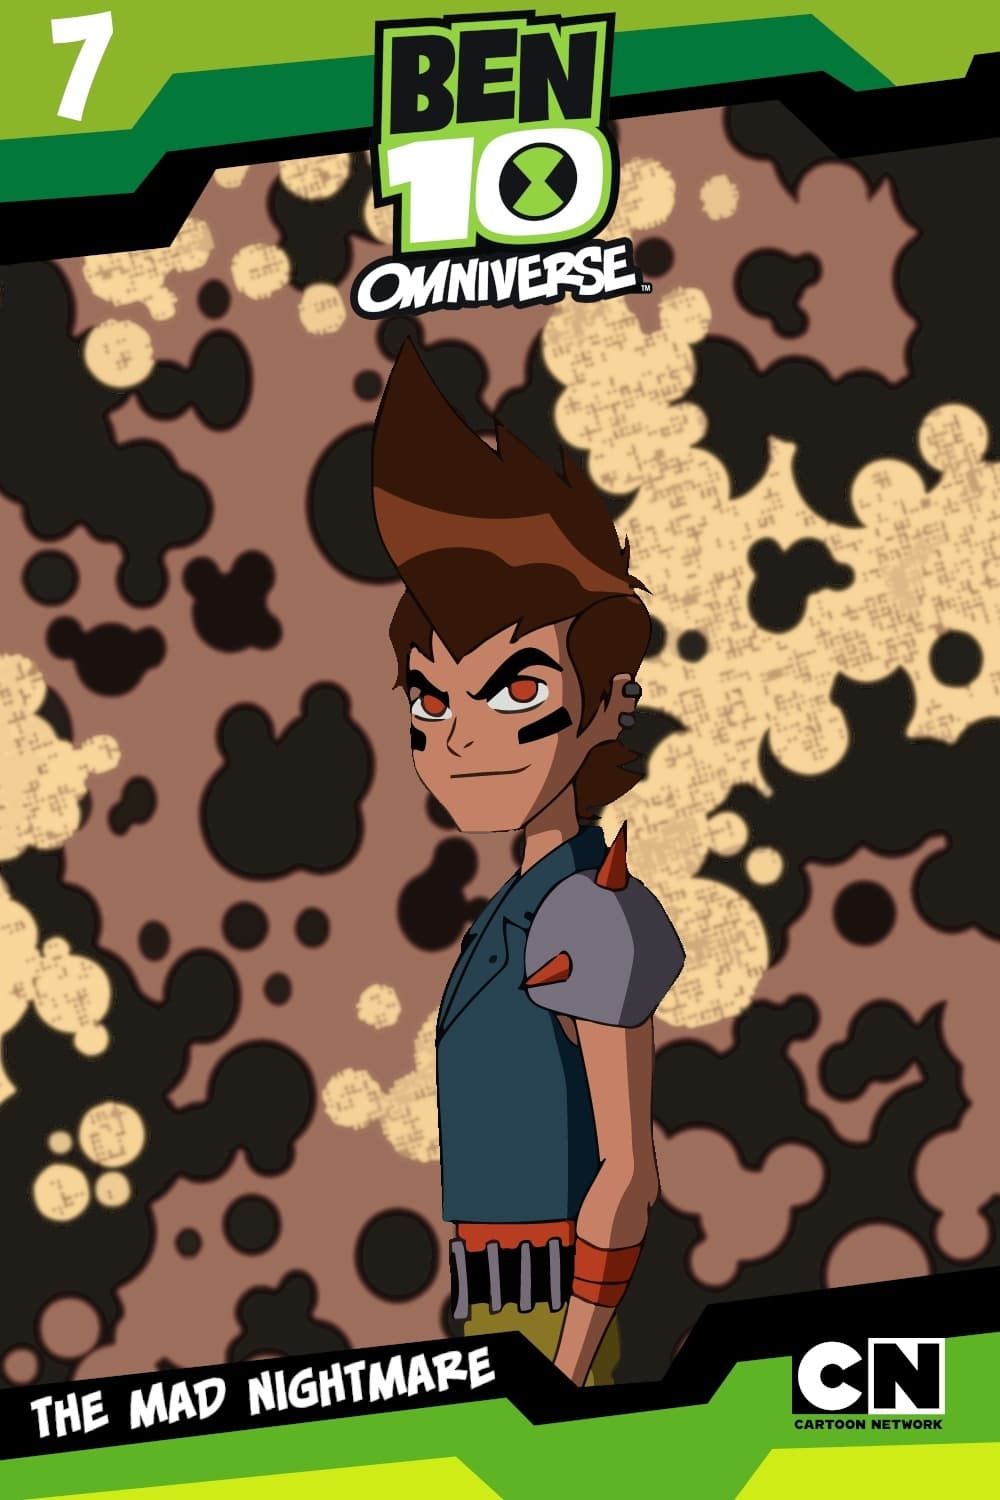 How to watch and stream Ben 10: Omniverse - 2012-2014 on Roku